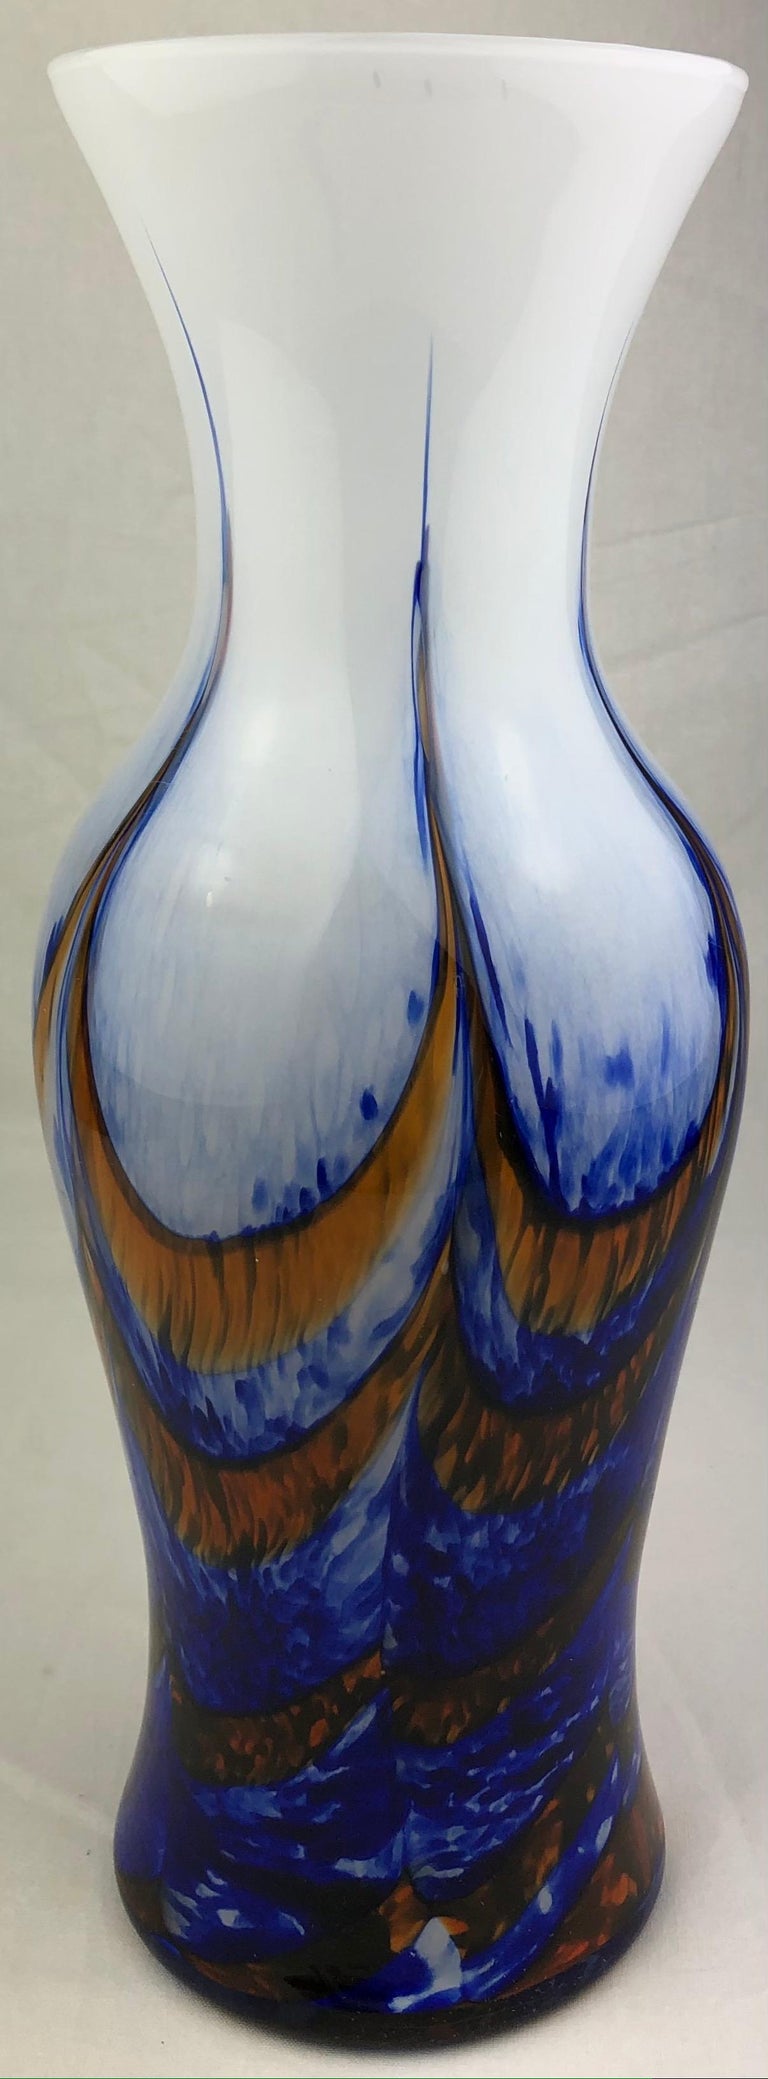 20th Century Tall French Midcentury Art Glass Vase Attributed to Schneider Glassworks For Sale